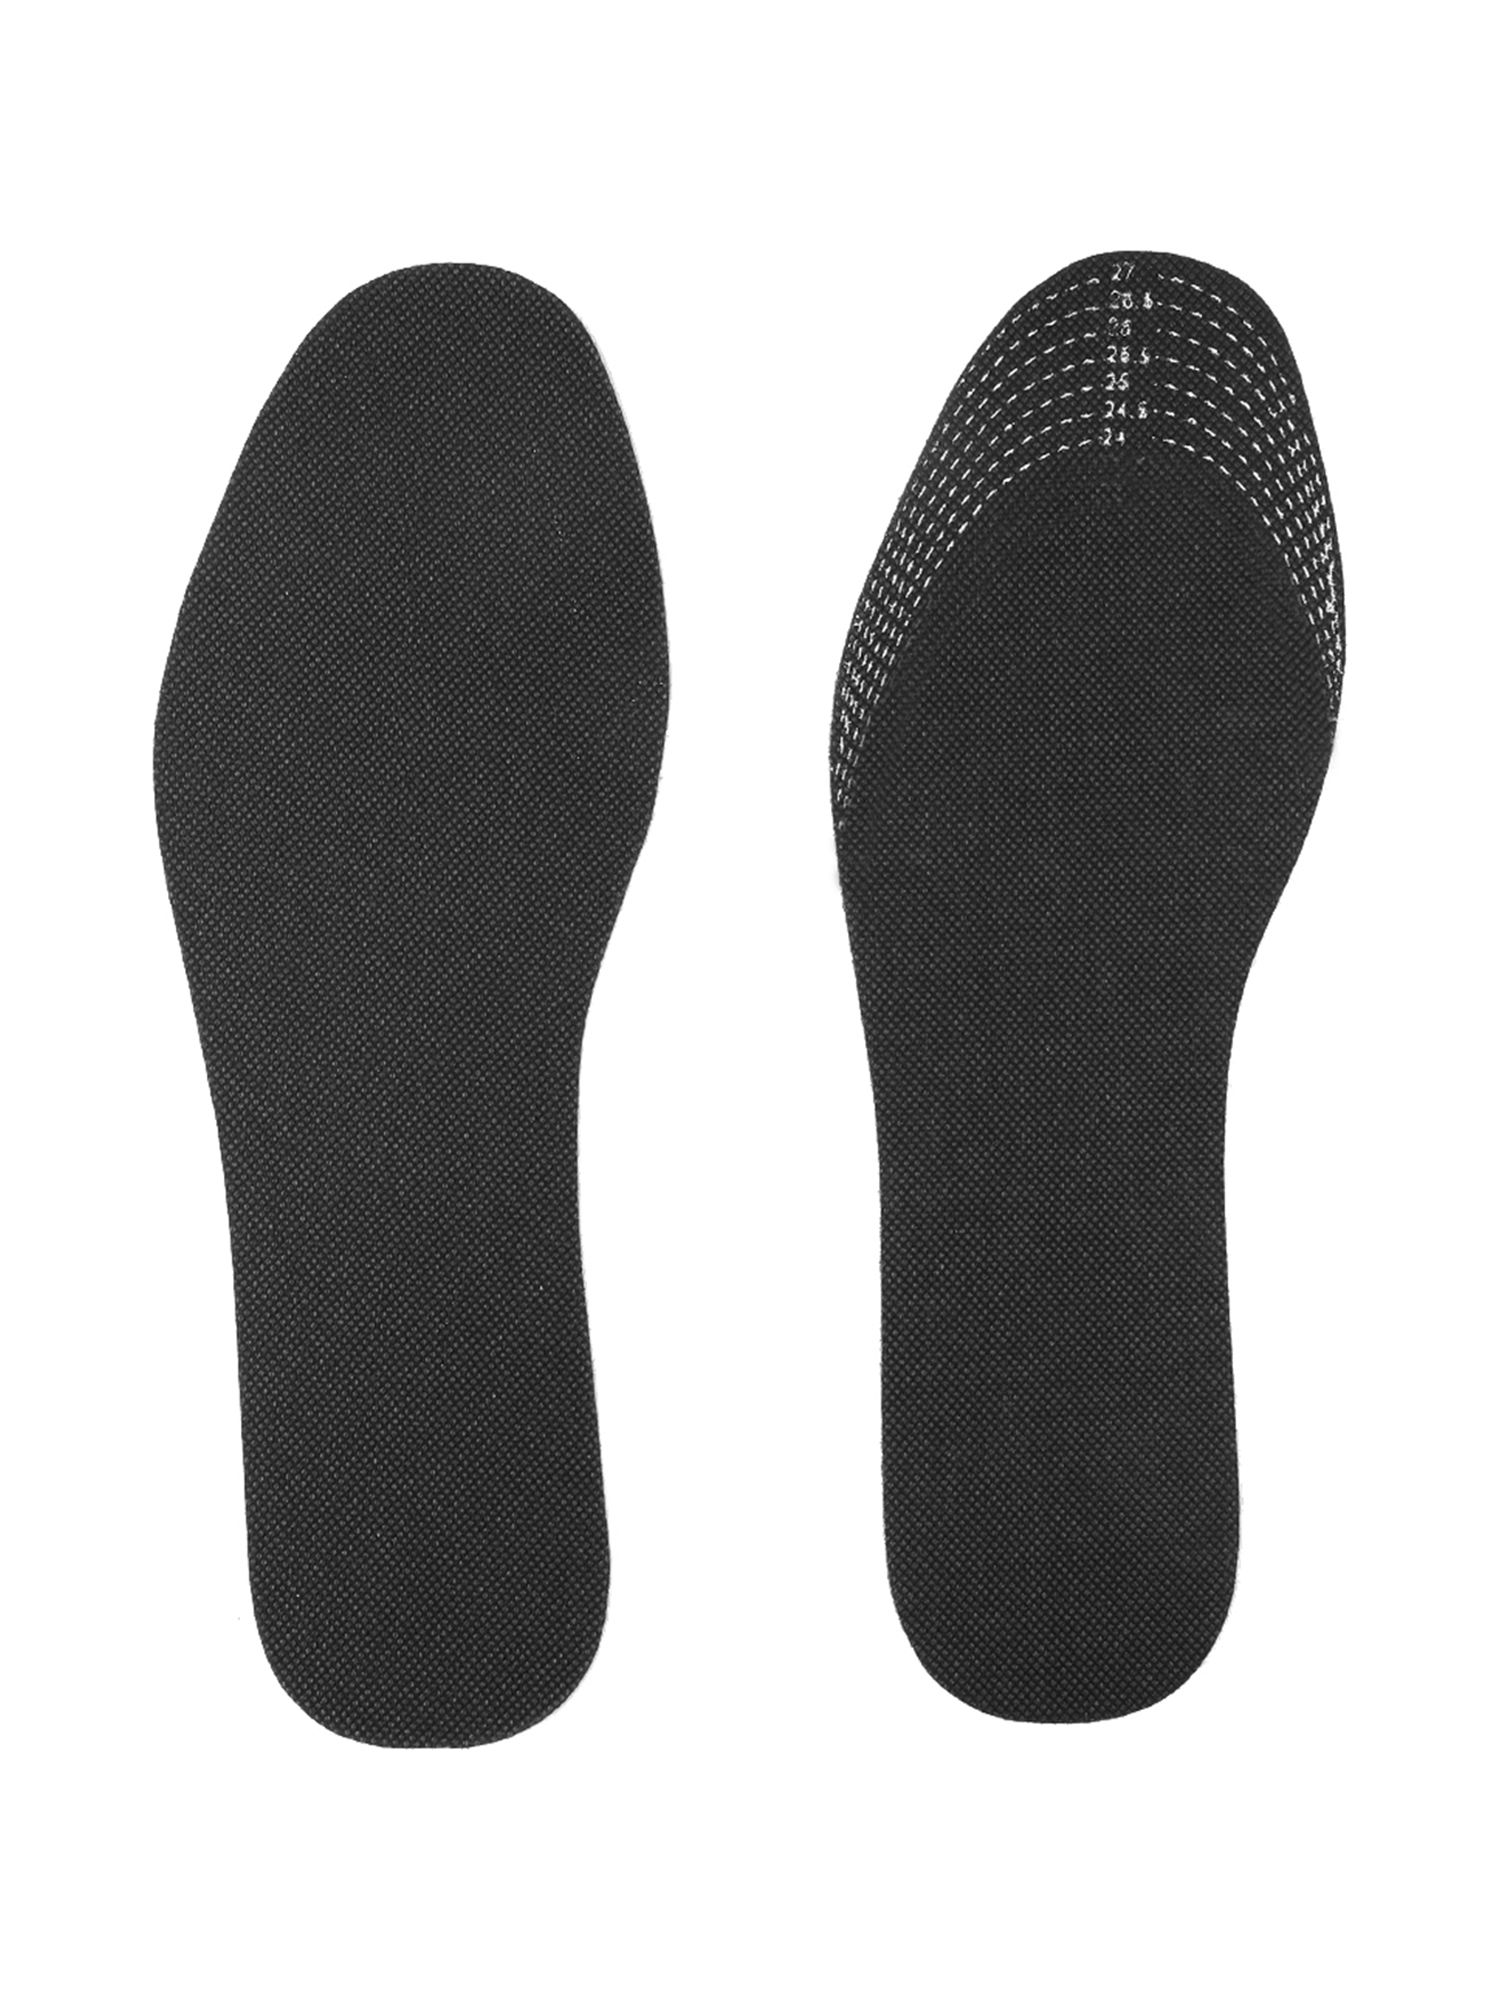 Allegra K Unisex Athletic Damping Absorb Shock Durable Insole for Sport Hiking - image 4 of 4